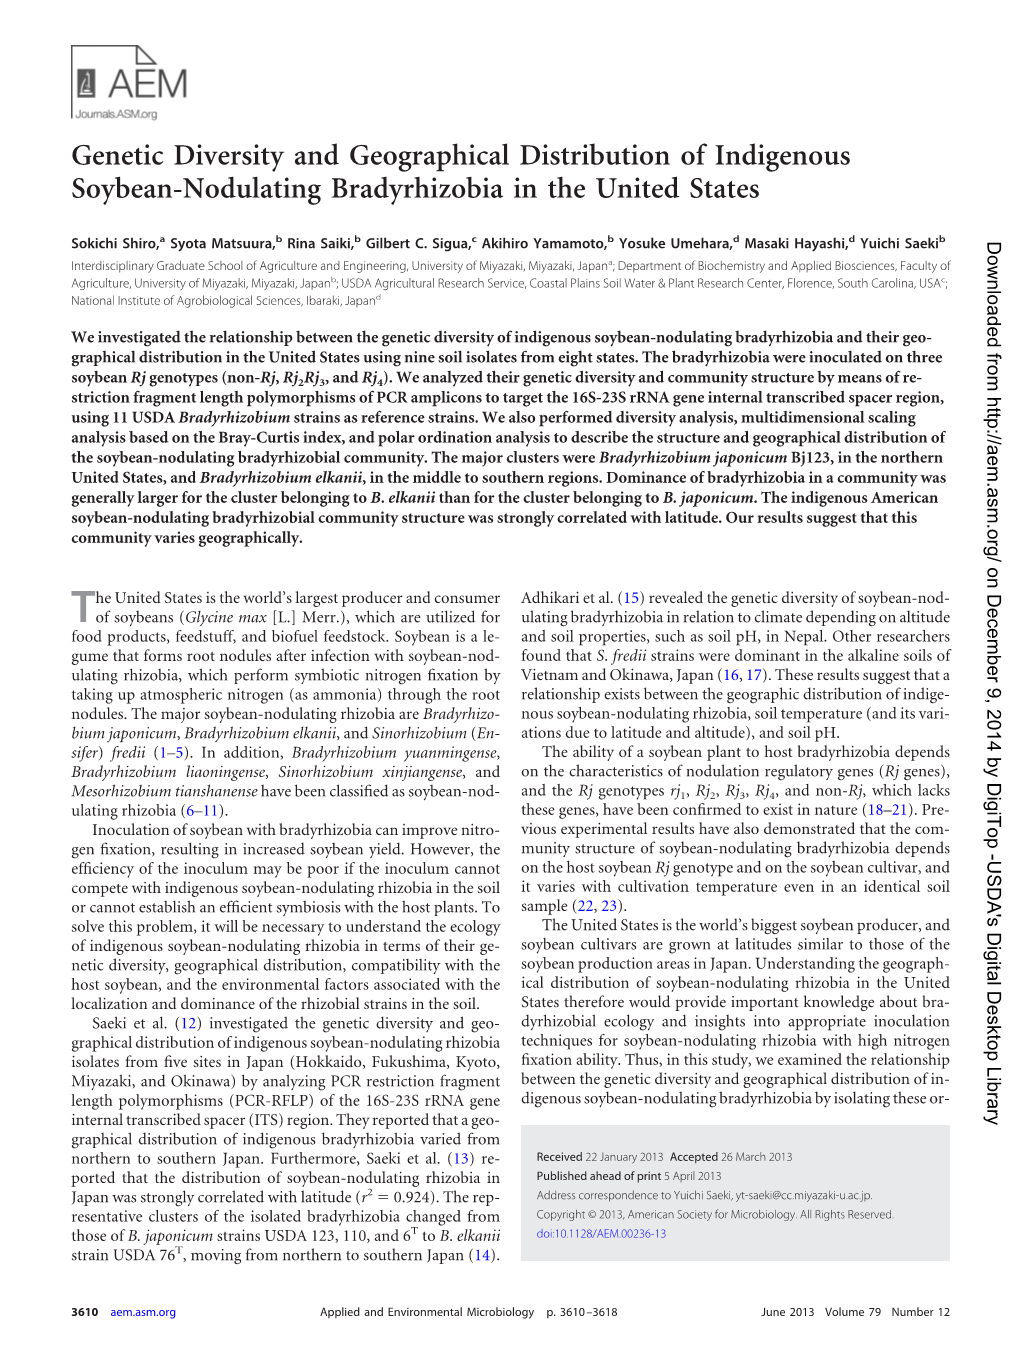 Genetic Diversity and Geographical Distribution of Indigenous Soybean-Nodulating Bradyrhizobia in the United States